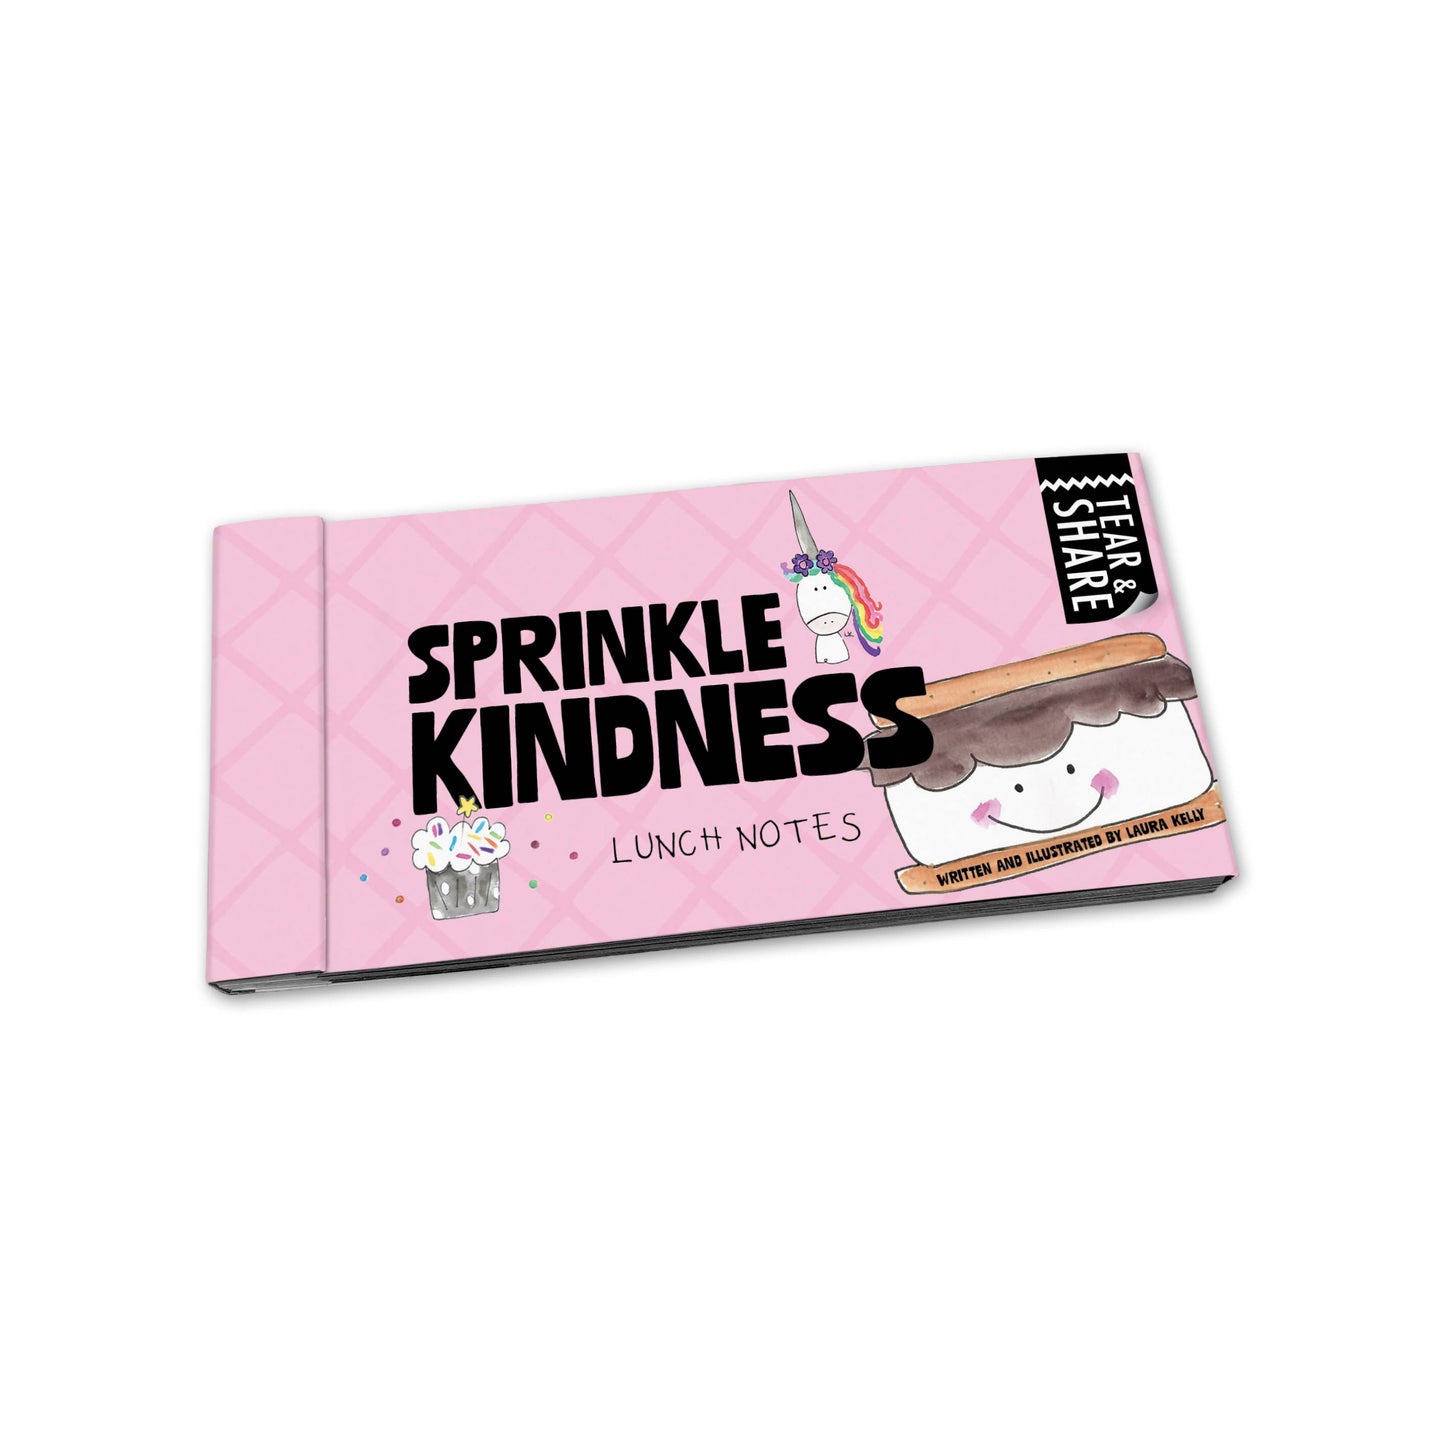 Laura Kelly: Kindness Tear & Share Lunch Notes